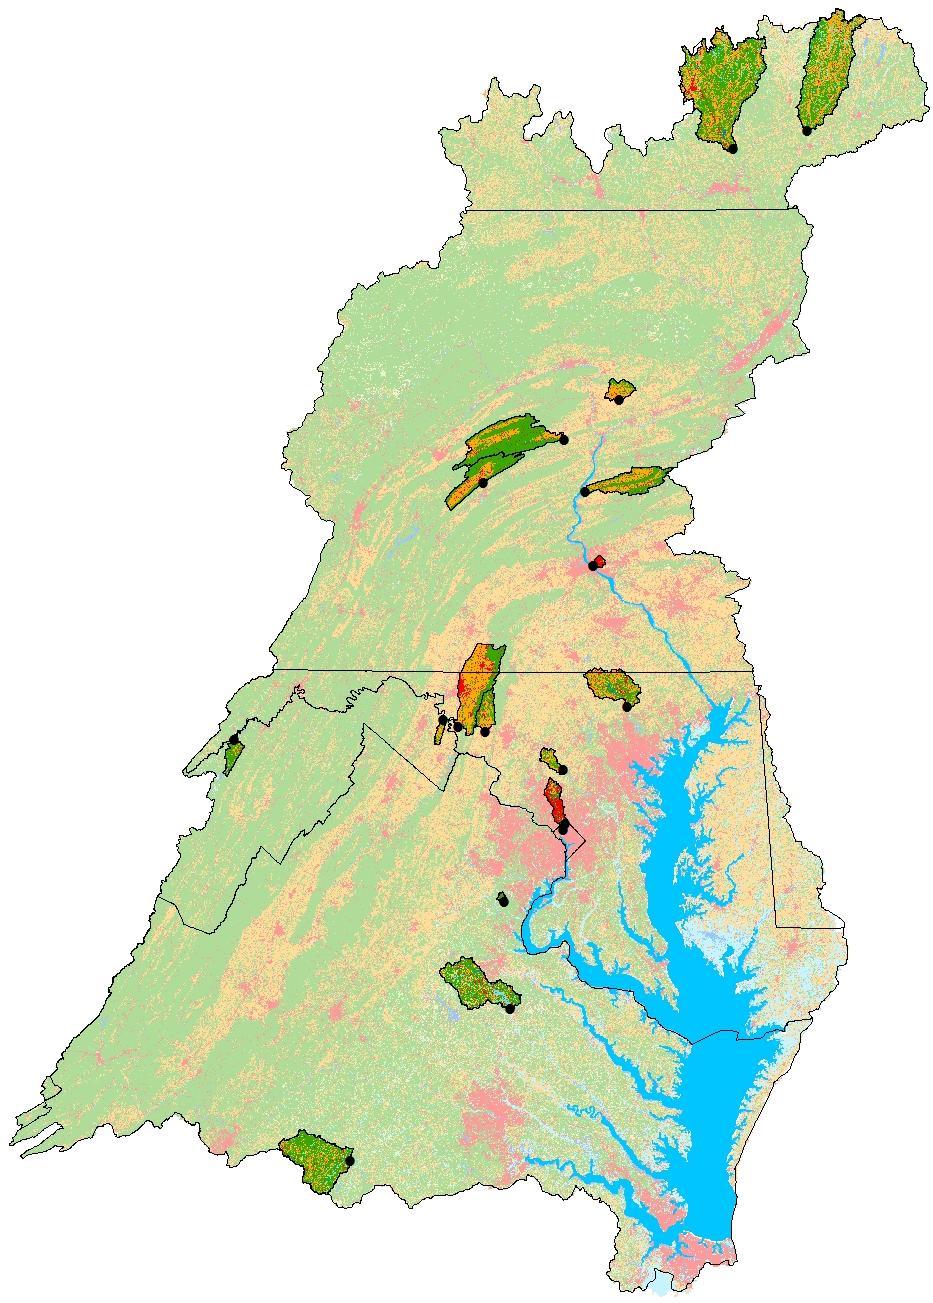 Proposed Station Cuts to the Chesapeake Bay Program Partnership s Non-tidal Monitoring Network Characteristics of management information lost given station cuts: 3 urban watersheds in MD and PA, and